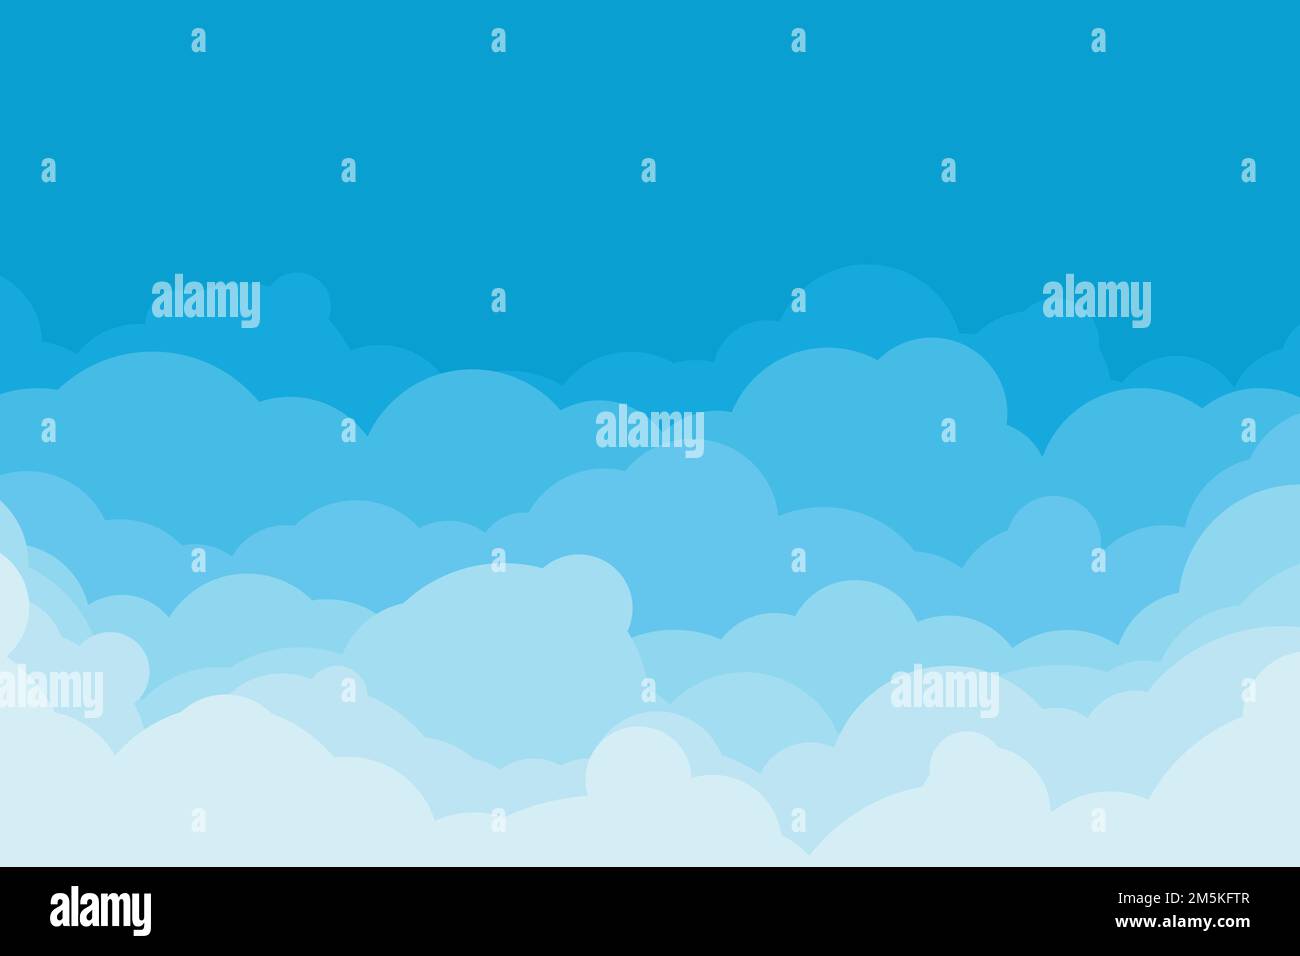 cartoon flat style white clouds on blue Stock Vector